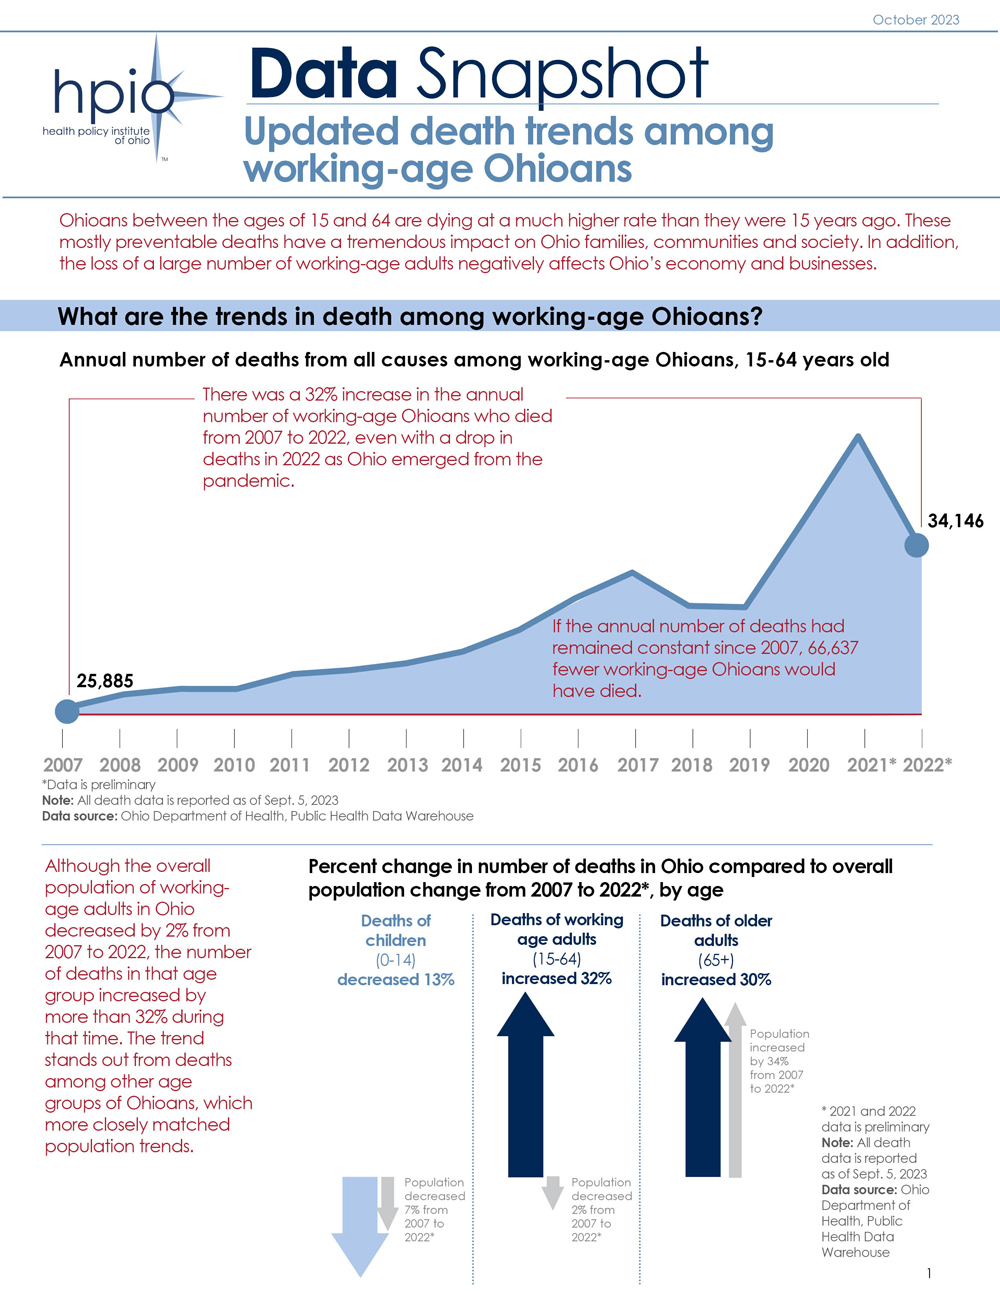 Line graph showing the annual number of deaths from all causes among working-age Ohioans 15-64 years old